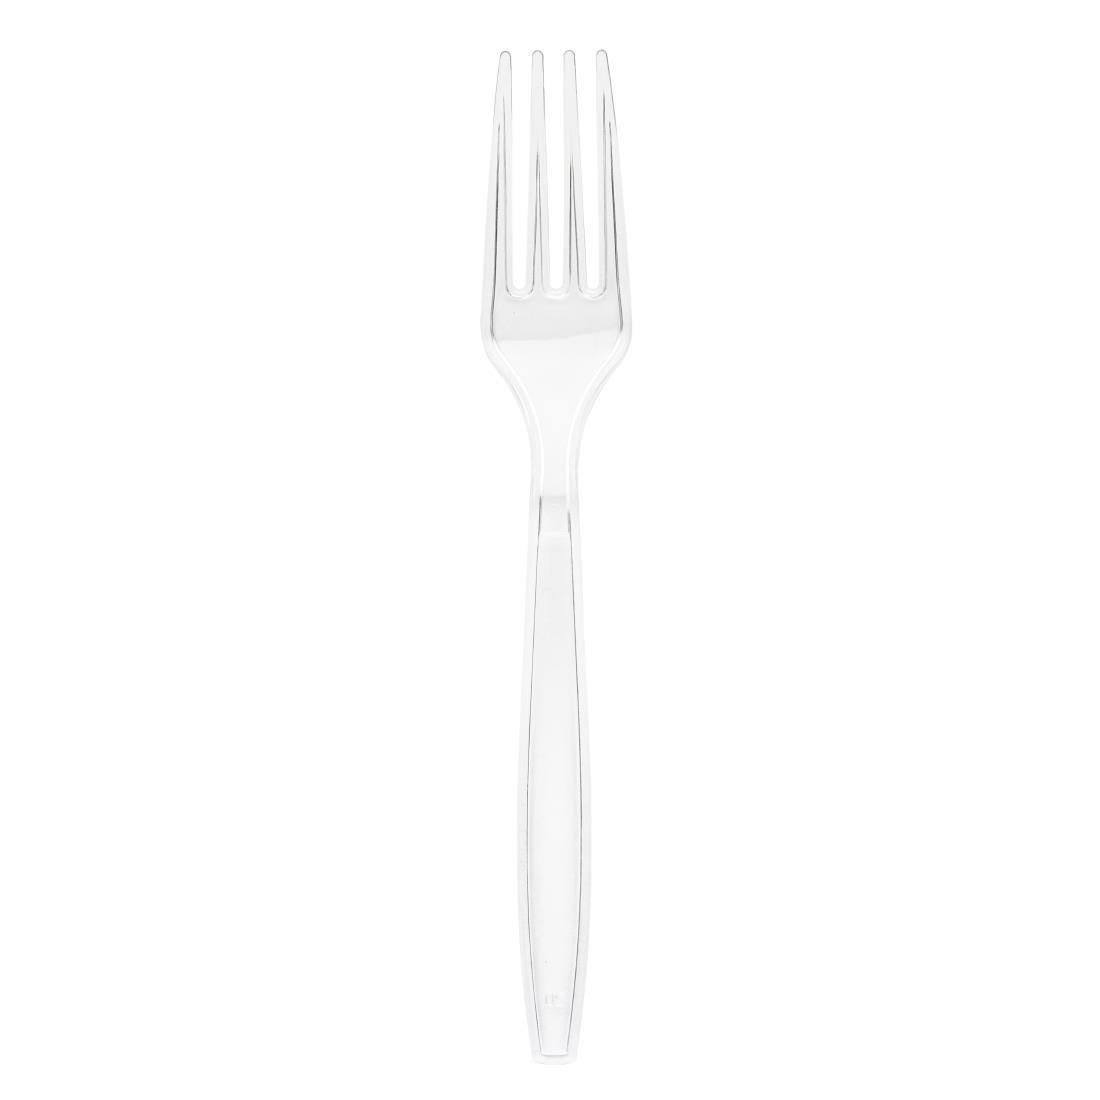 Fiesta Heavy-Duty Disposable Plastic Forks Clear (Pack of 100) - CP888  - 2